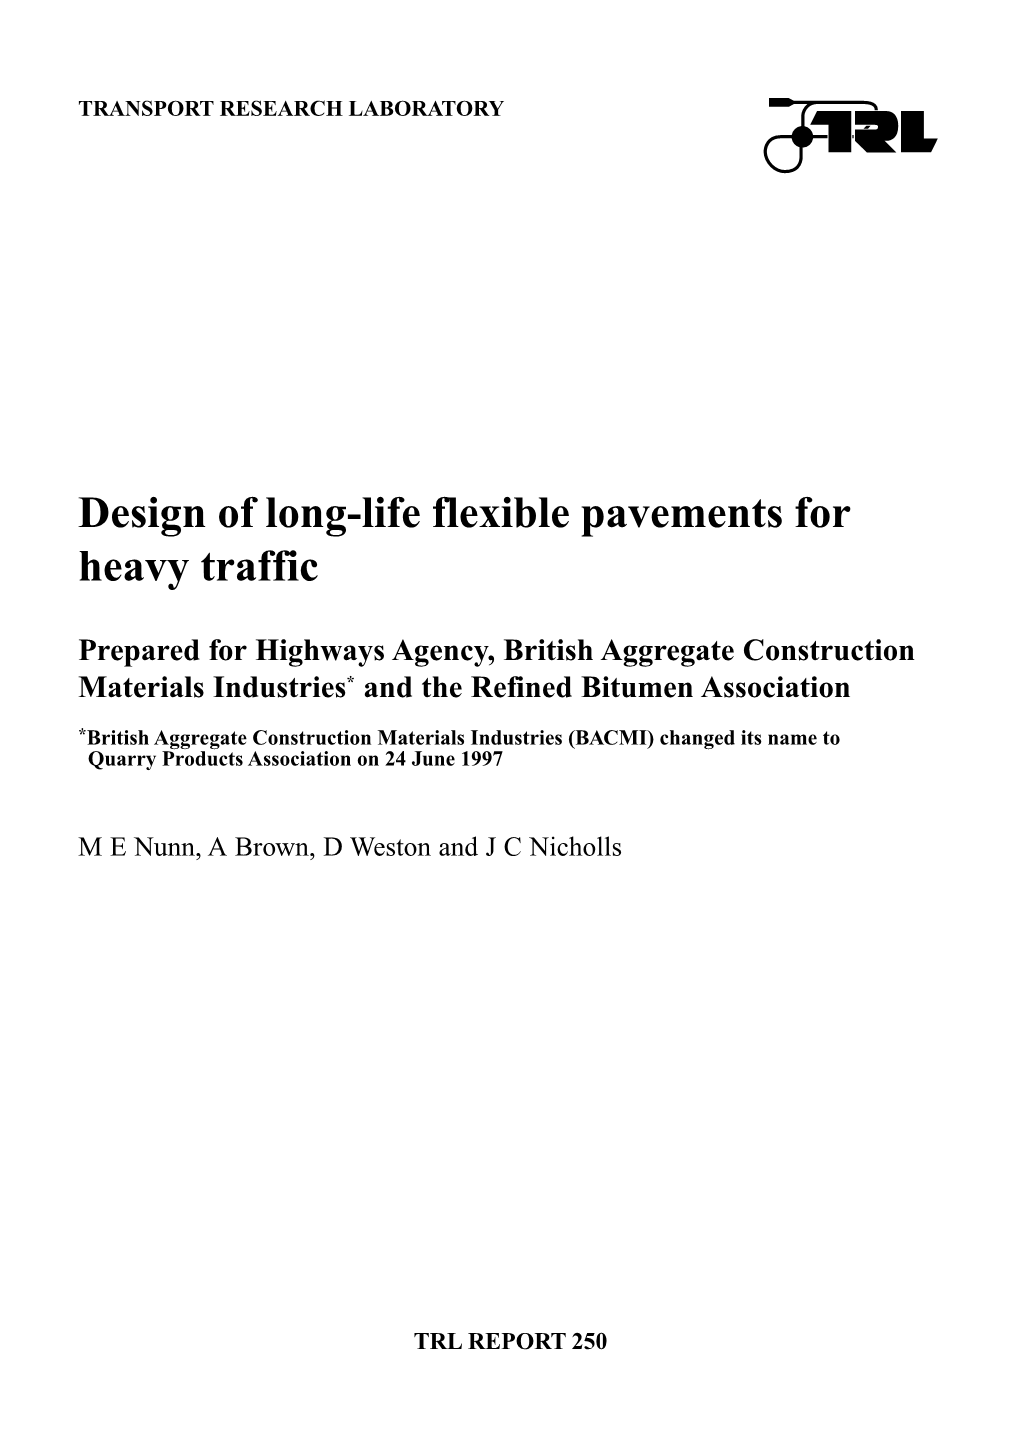 TRL250 Design of Long-Life Flexible Pavements for Heavy Traffic